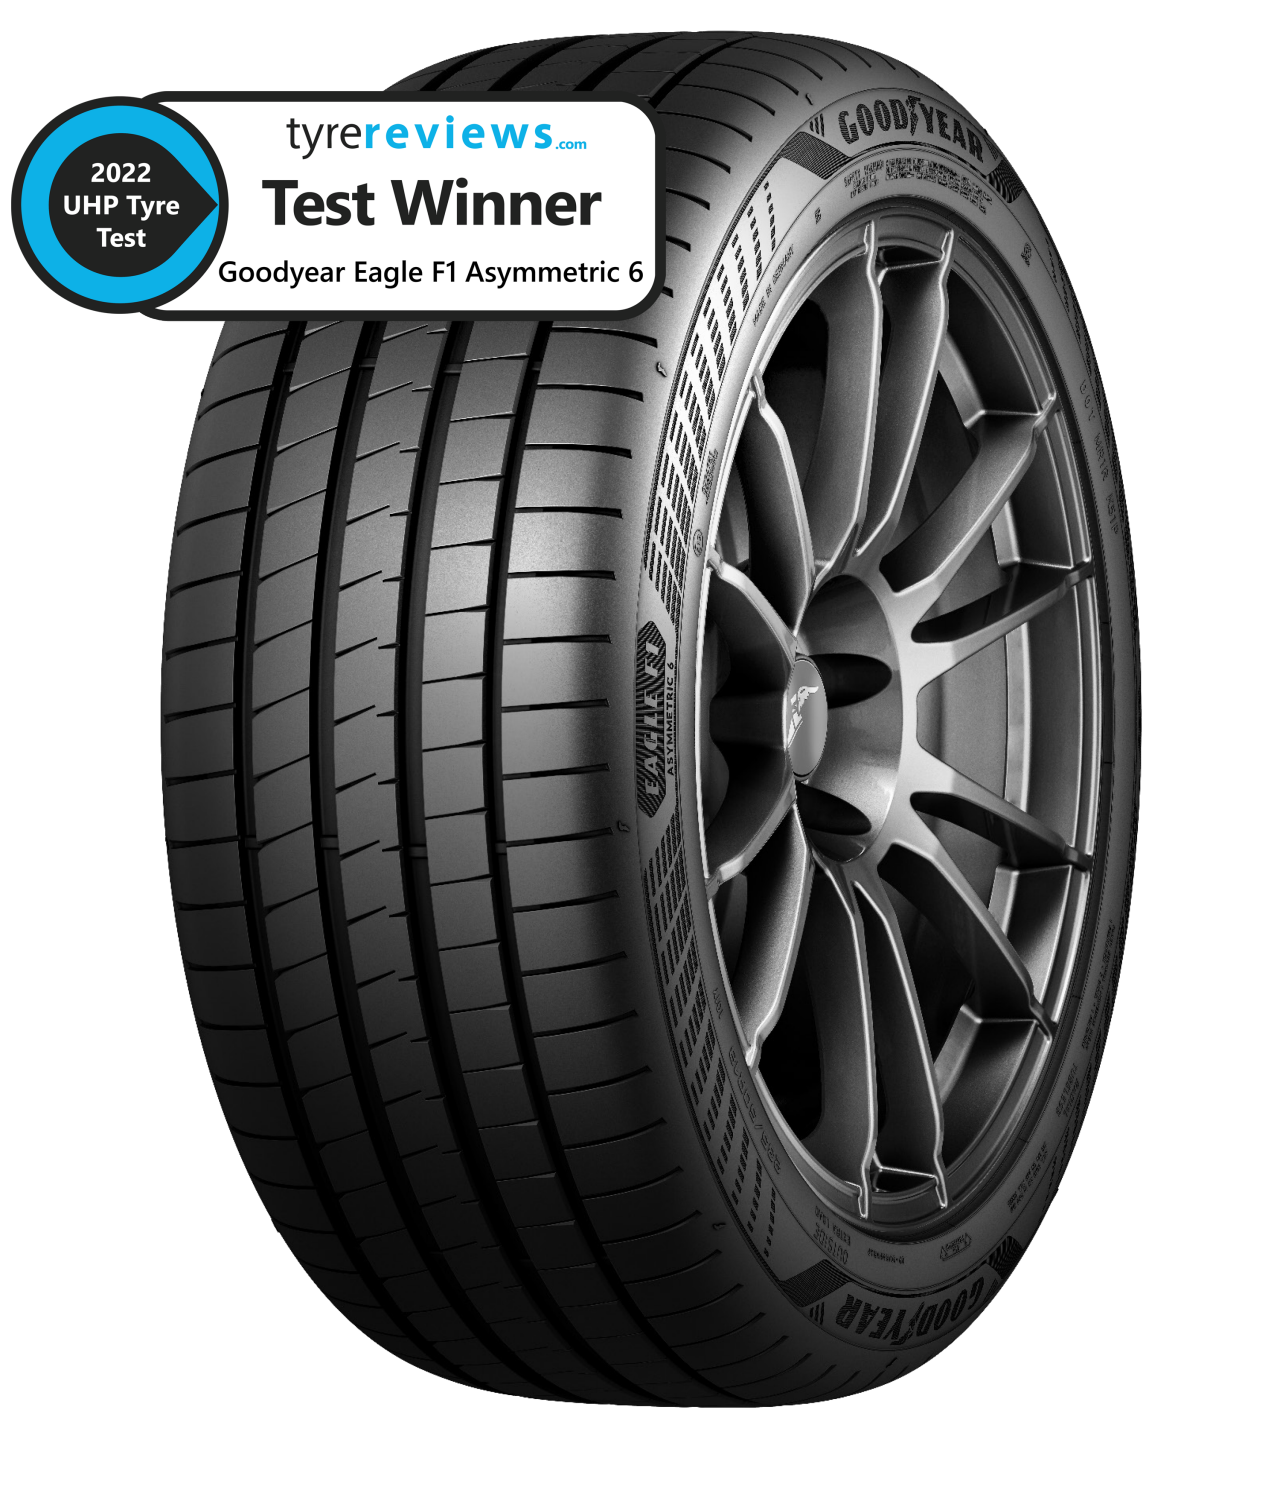 Eagle F1 Asymmetric 6 tyre shot with Tyre Reviews 2022 UHP Tyre Test Winner Badge 